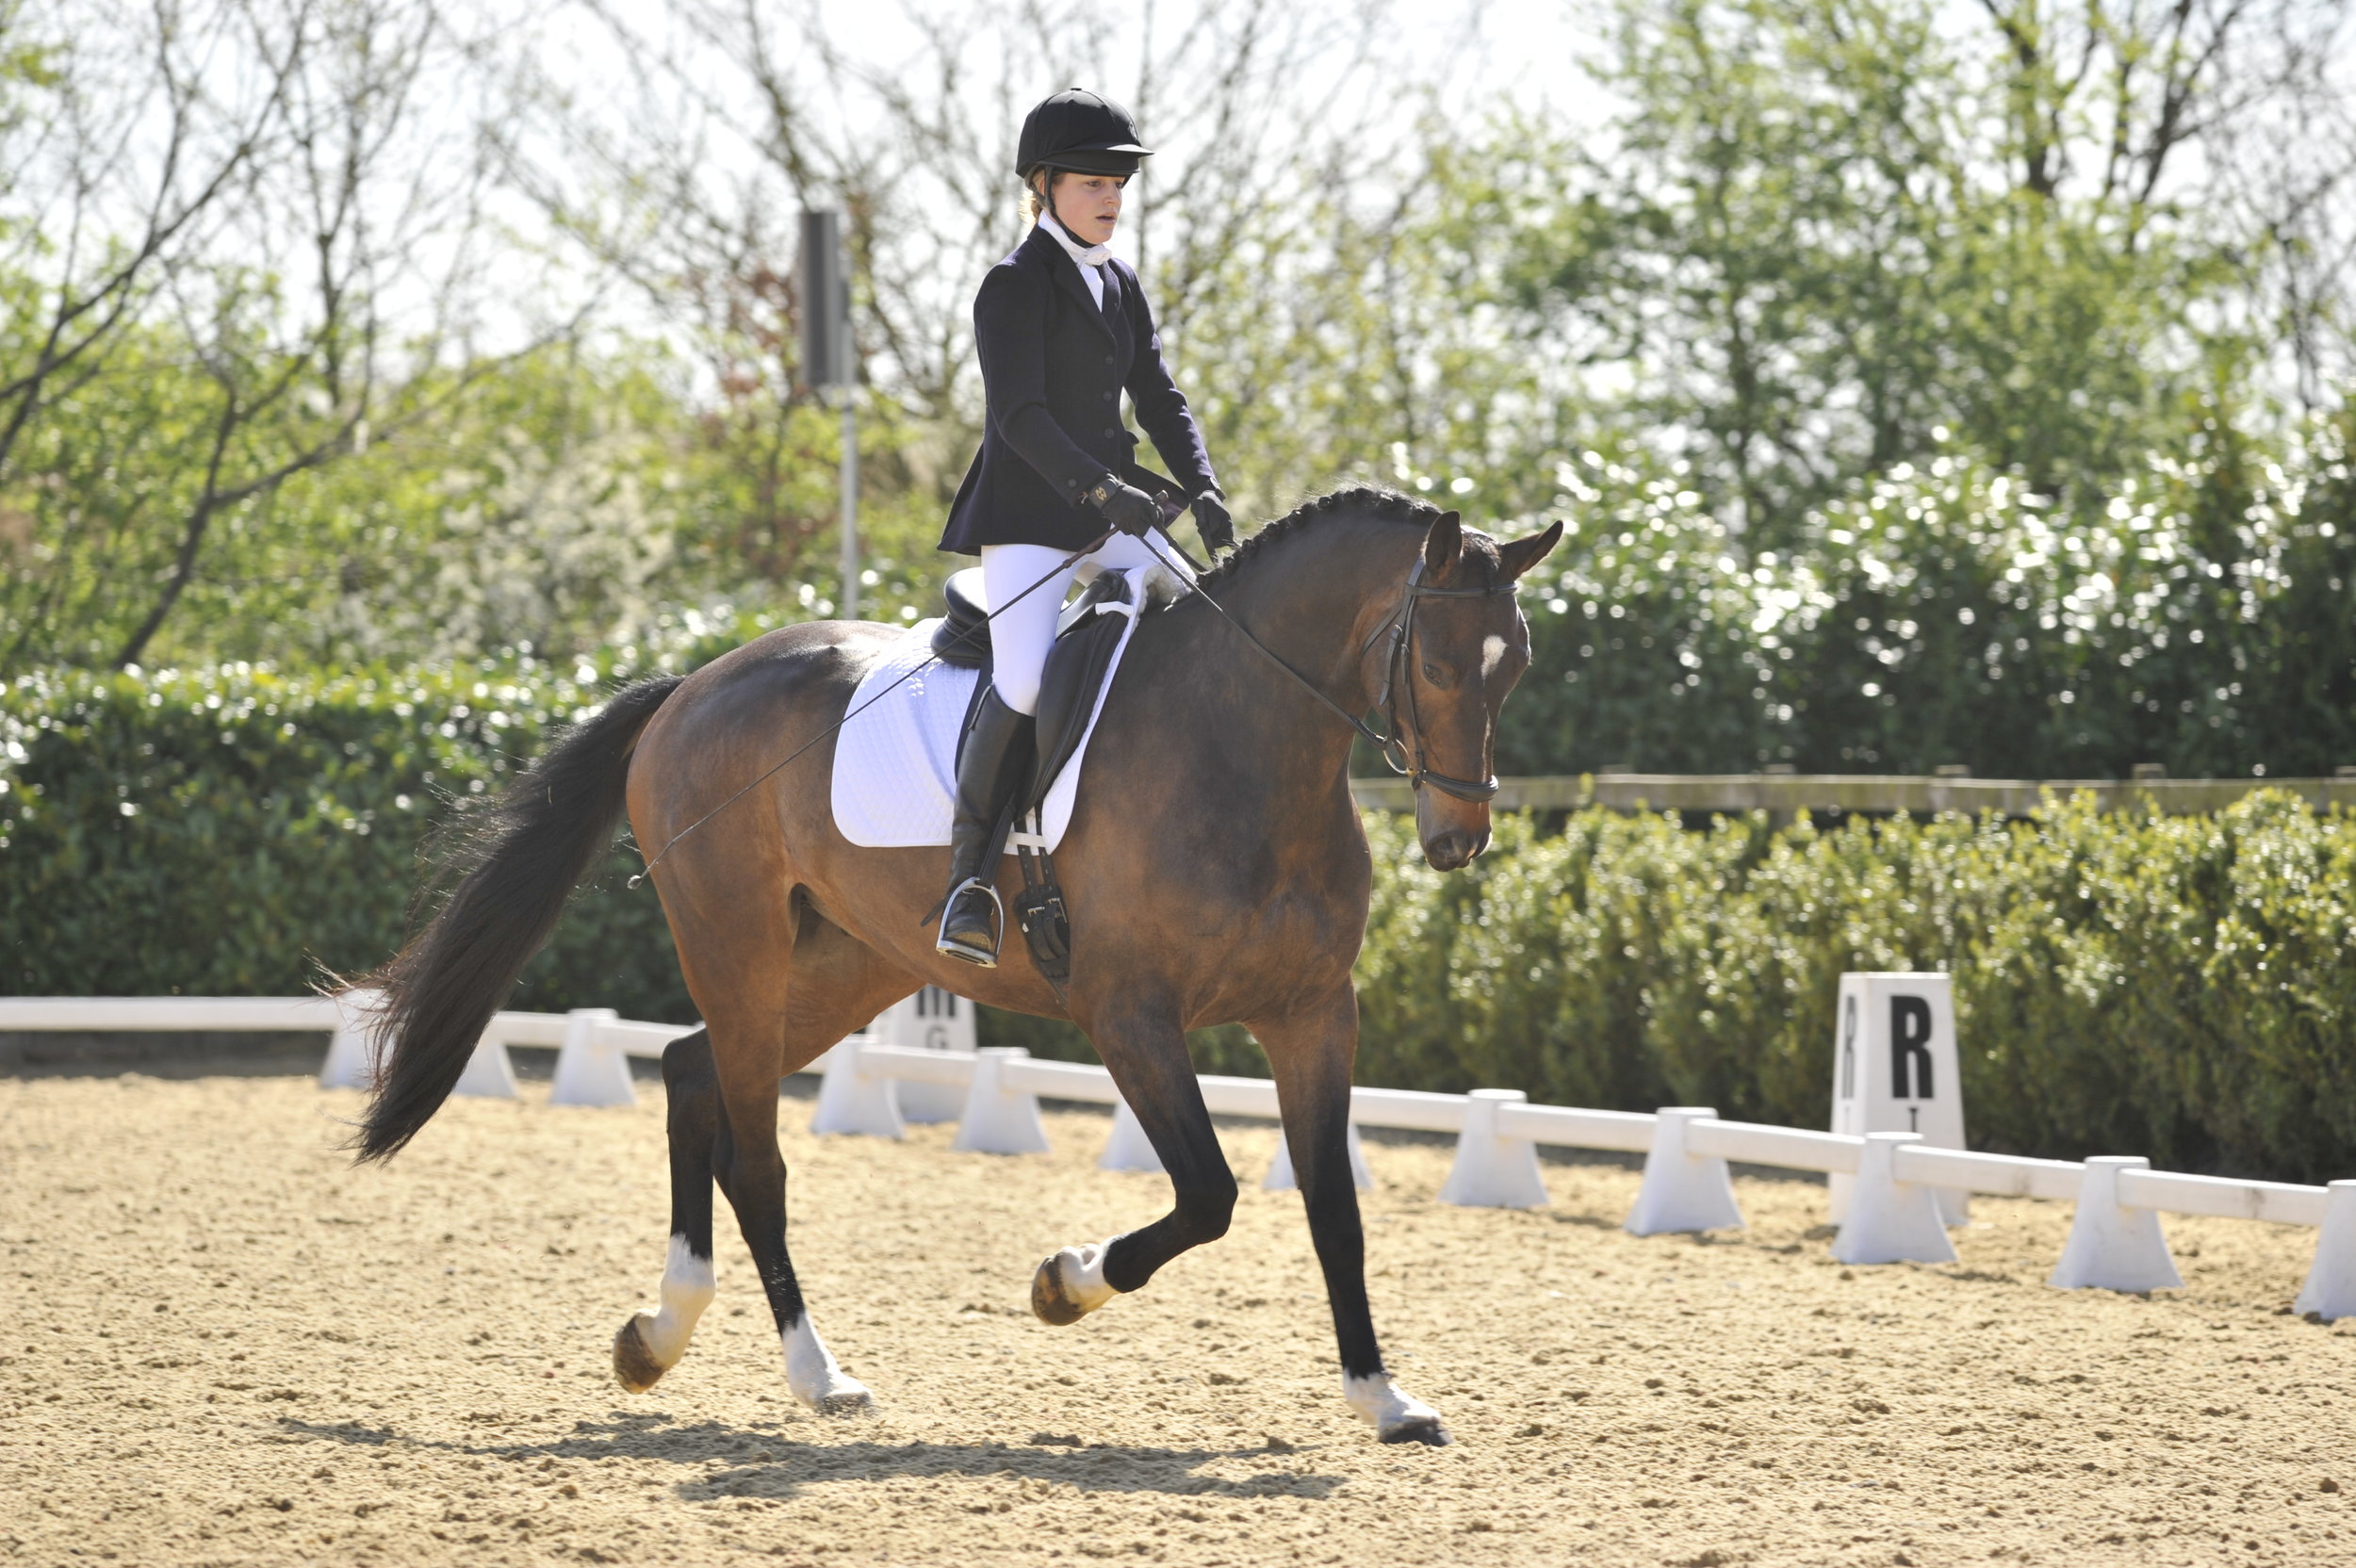 New dressage judge training promises to enhance competitor experience